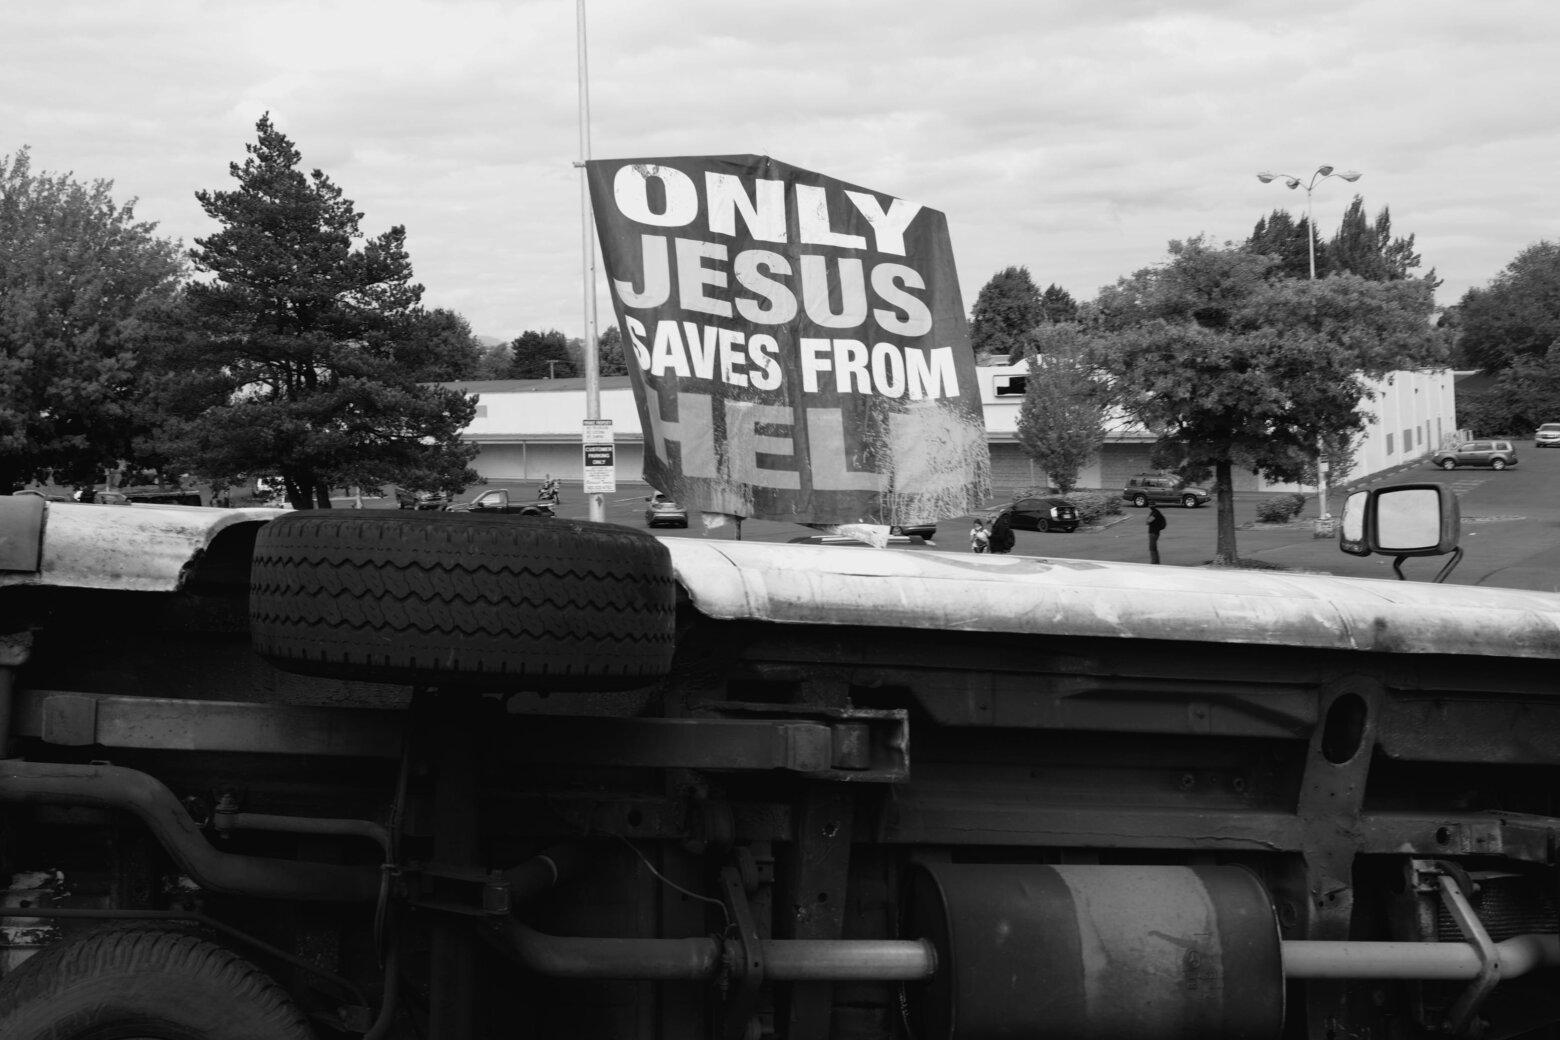 A photograph of an overturned van in a parking lot. In the background, a sign reads: 'Only Jesus saves from hell' in all caps.